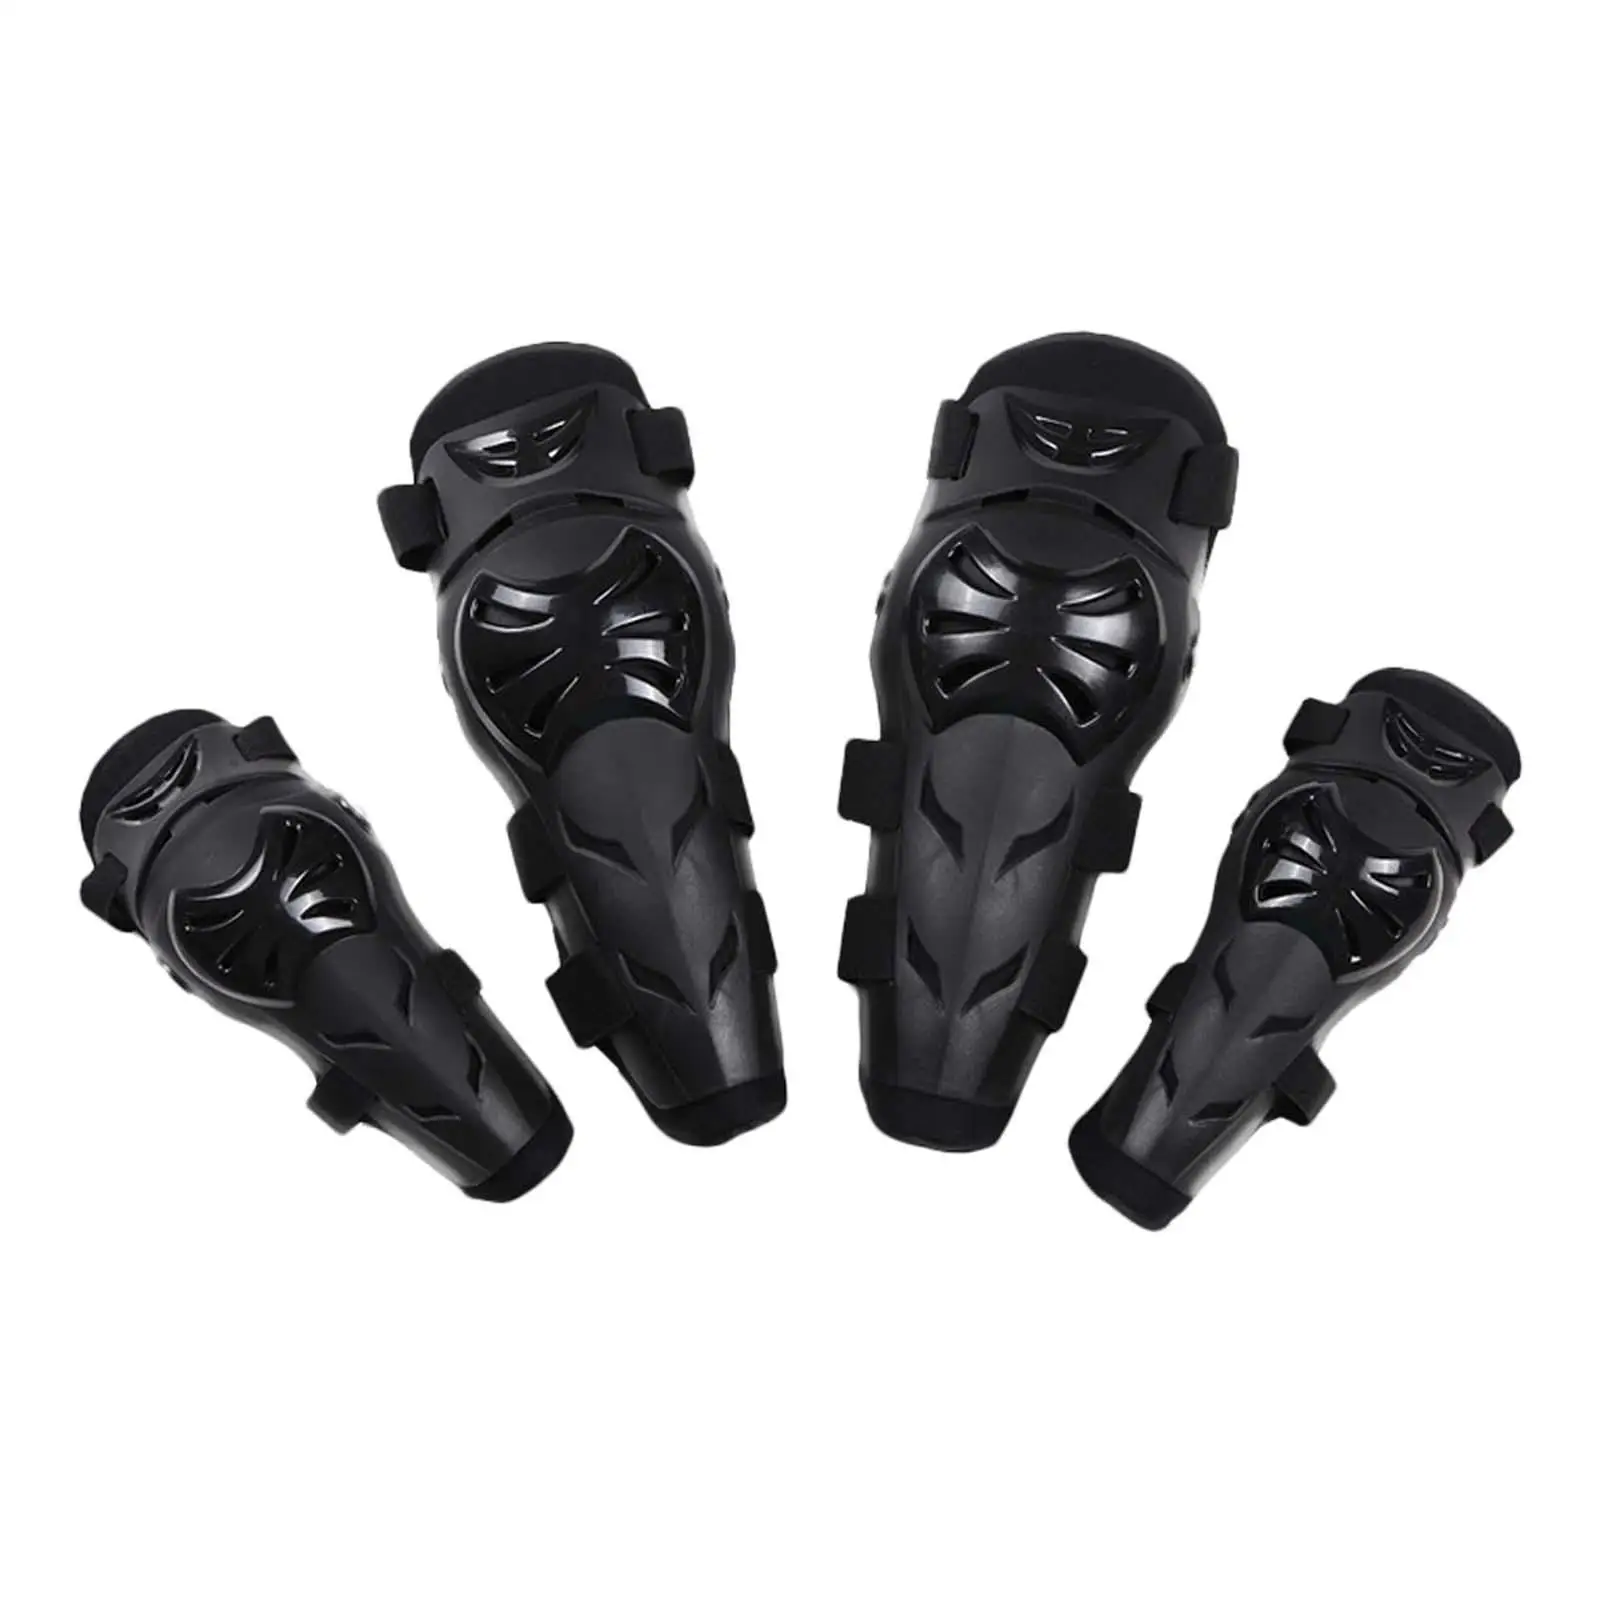 4x Motorcycle Knee Shin Guards Protective Elbow Guard Pads for Motocross Skiing Powersports Mountain Biking Motorcycle